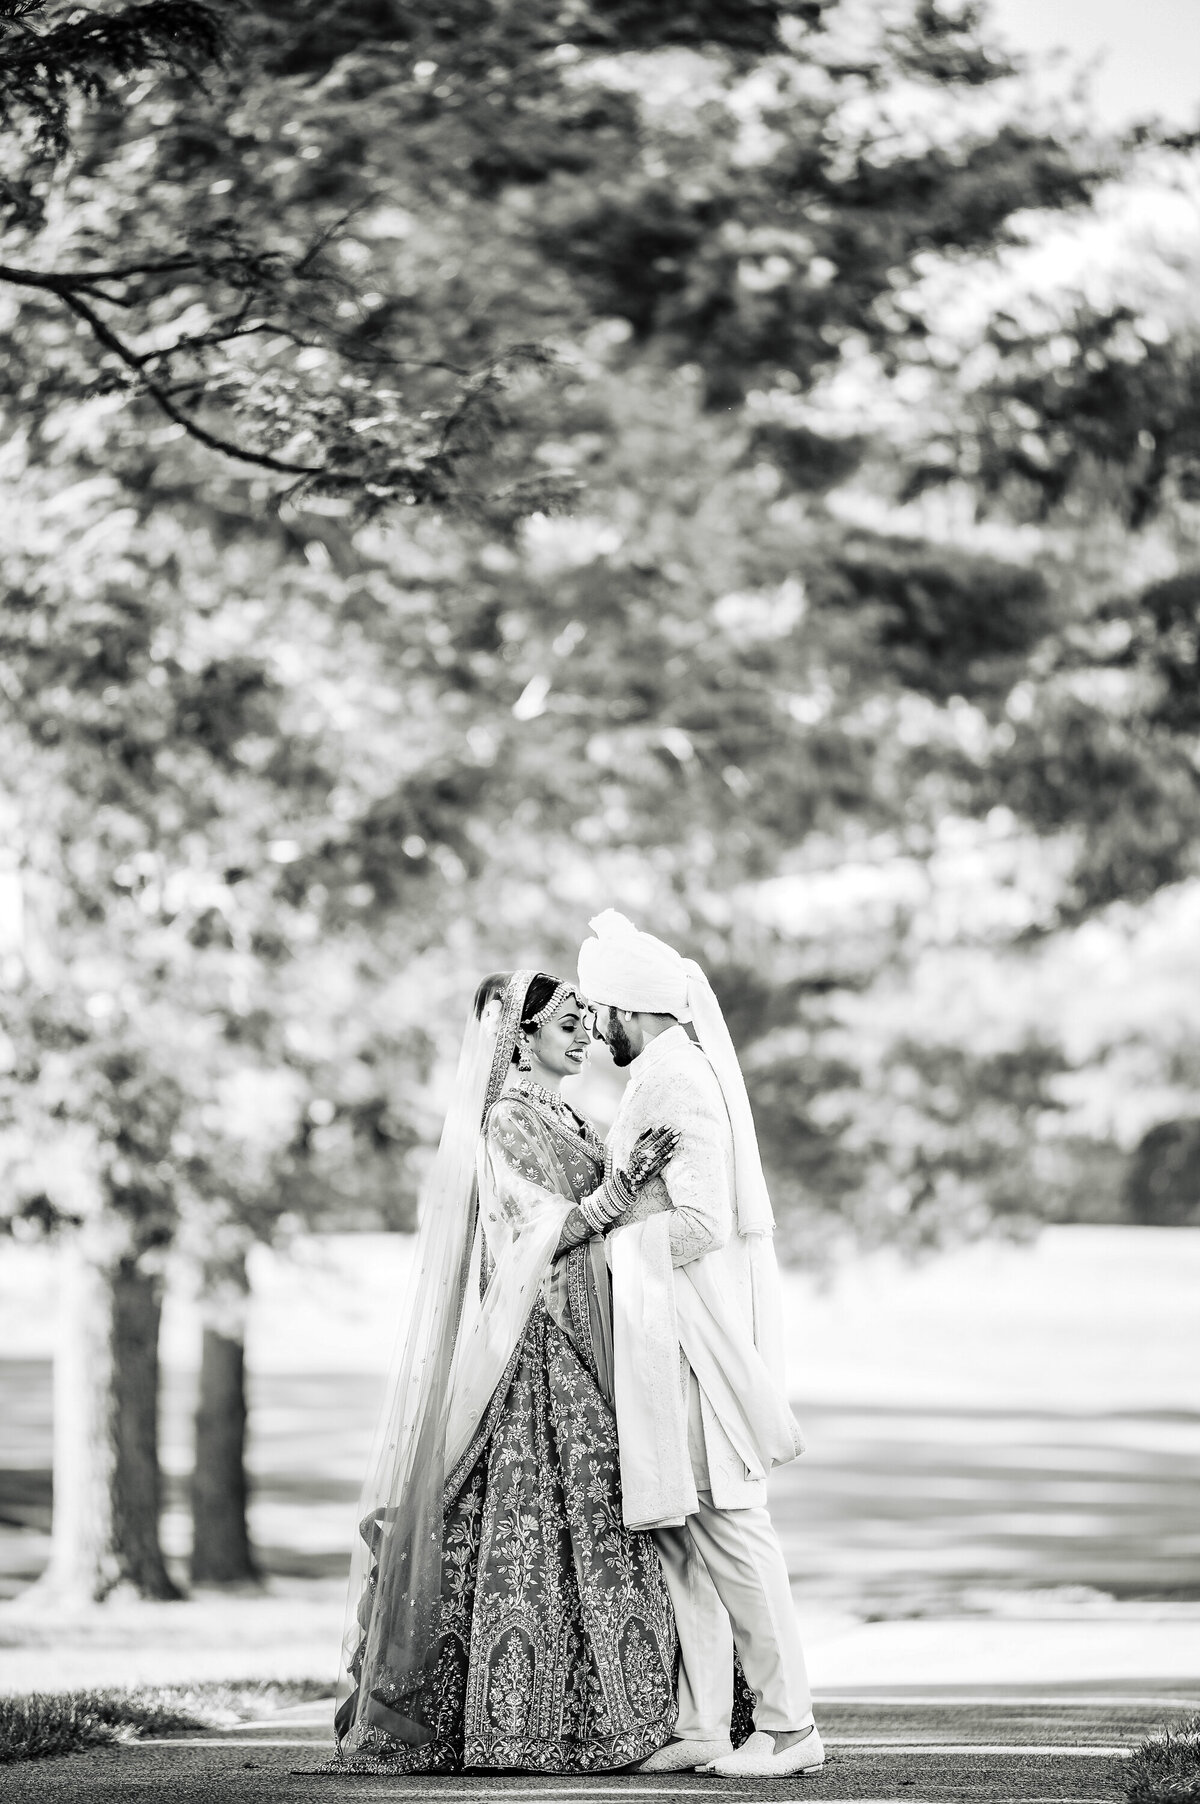 Ishan Fotografi is South Jersey's top-rated wedding photography expert. Contact us for a photography quote today.